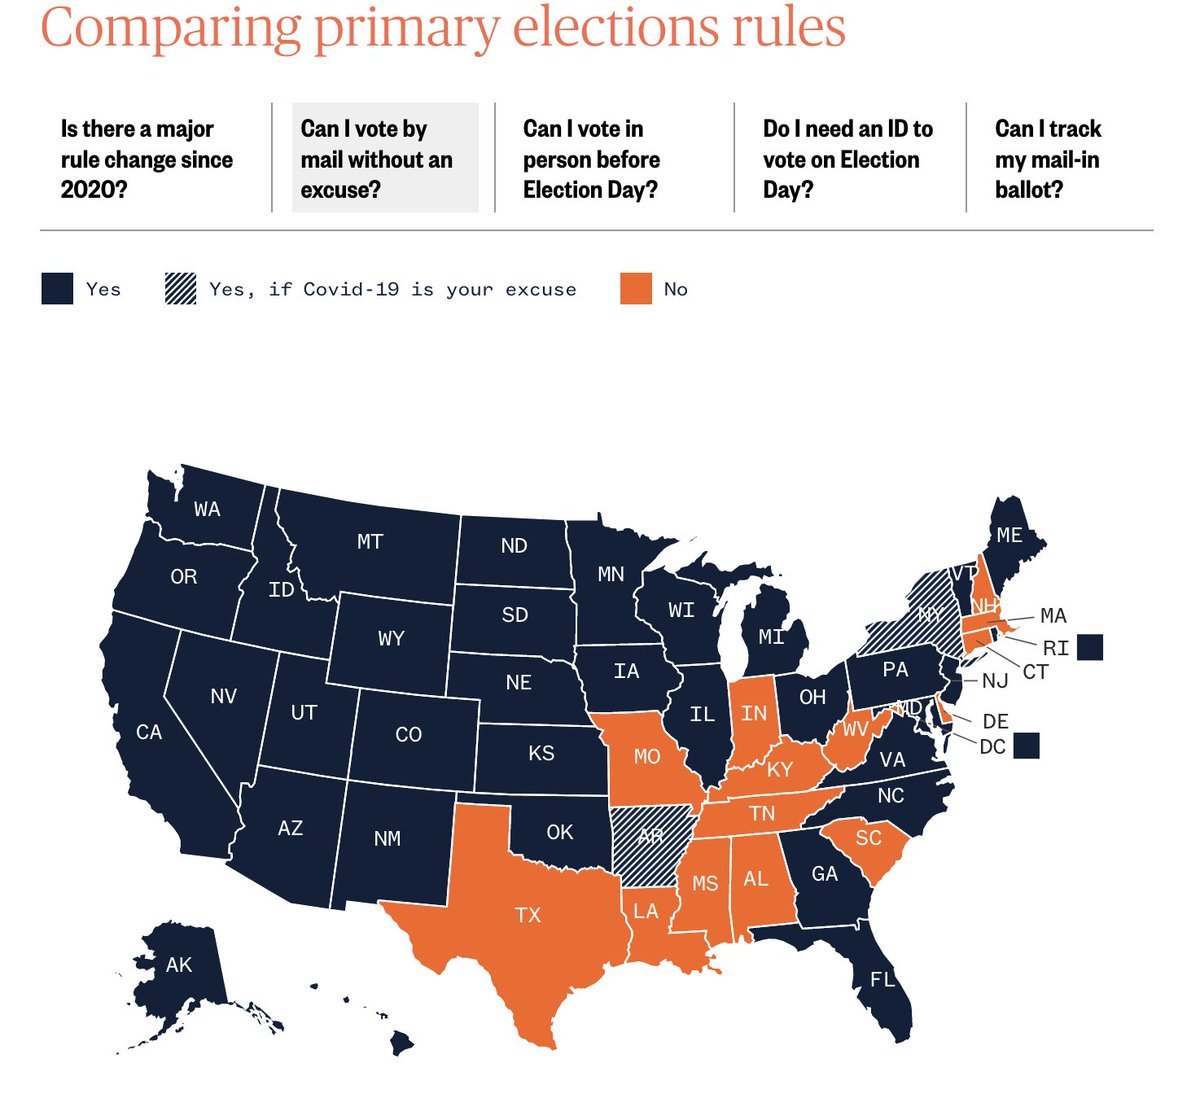 The landscape of vote-by-mail rules in the U.S., part of @NBCNews' brand-new nbcnews.com/planyourvote site